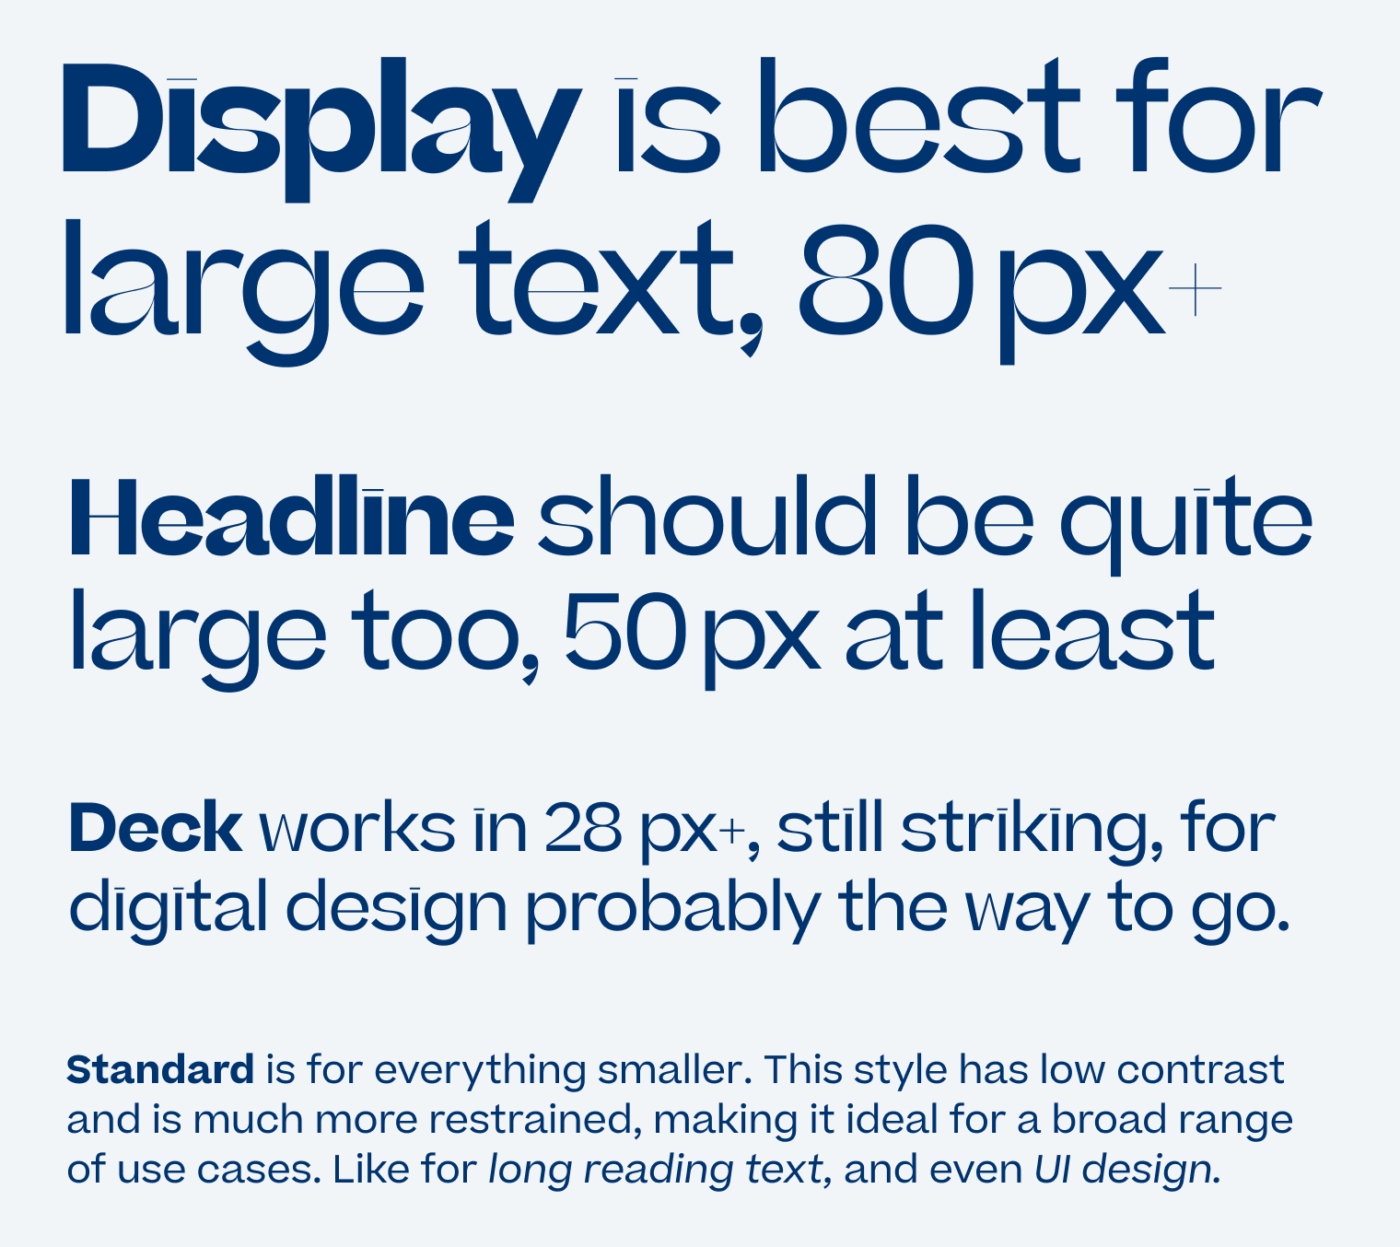 Display is best for large toxt, 80px Headline should be quite large too, 50 px at least
Deck works in 28 px+, still striking, for digital design probably the way to go.
Standard is for everything smaller. This style has low contrast and is much more restrained, making it ideal for a broad range of use cases. Like for long reading text, and even UI design.